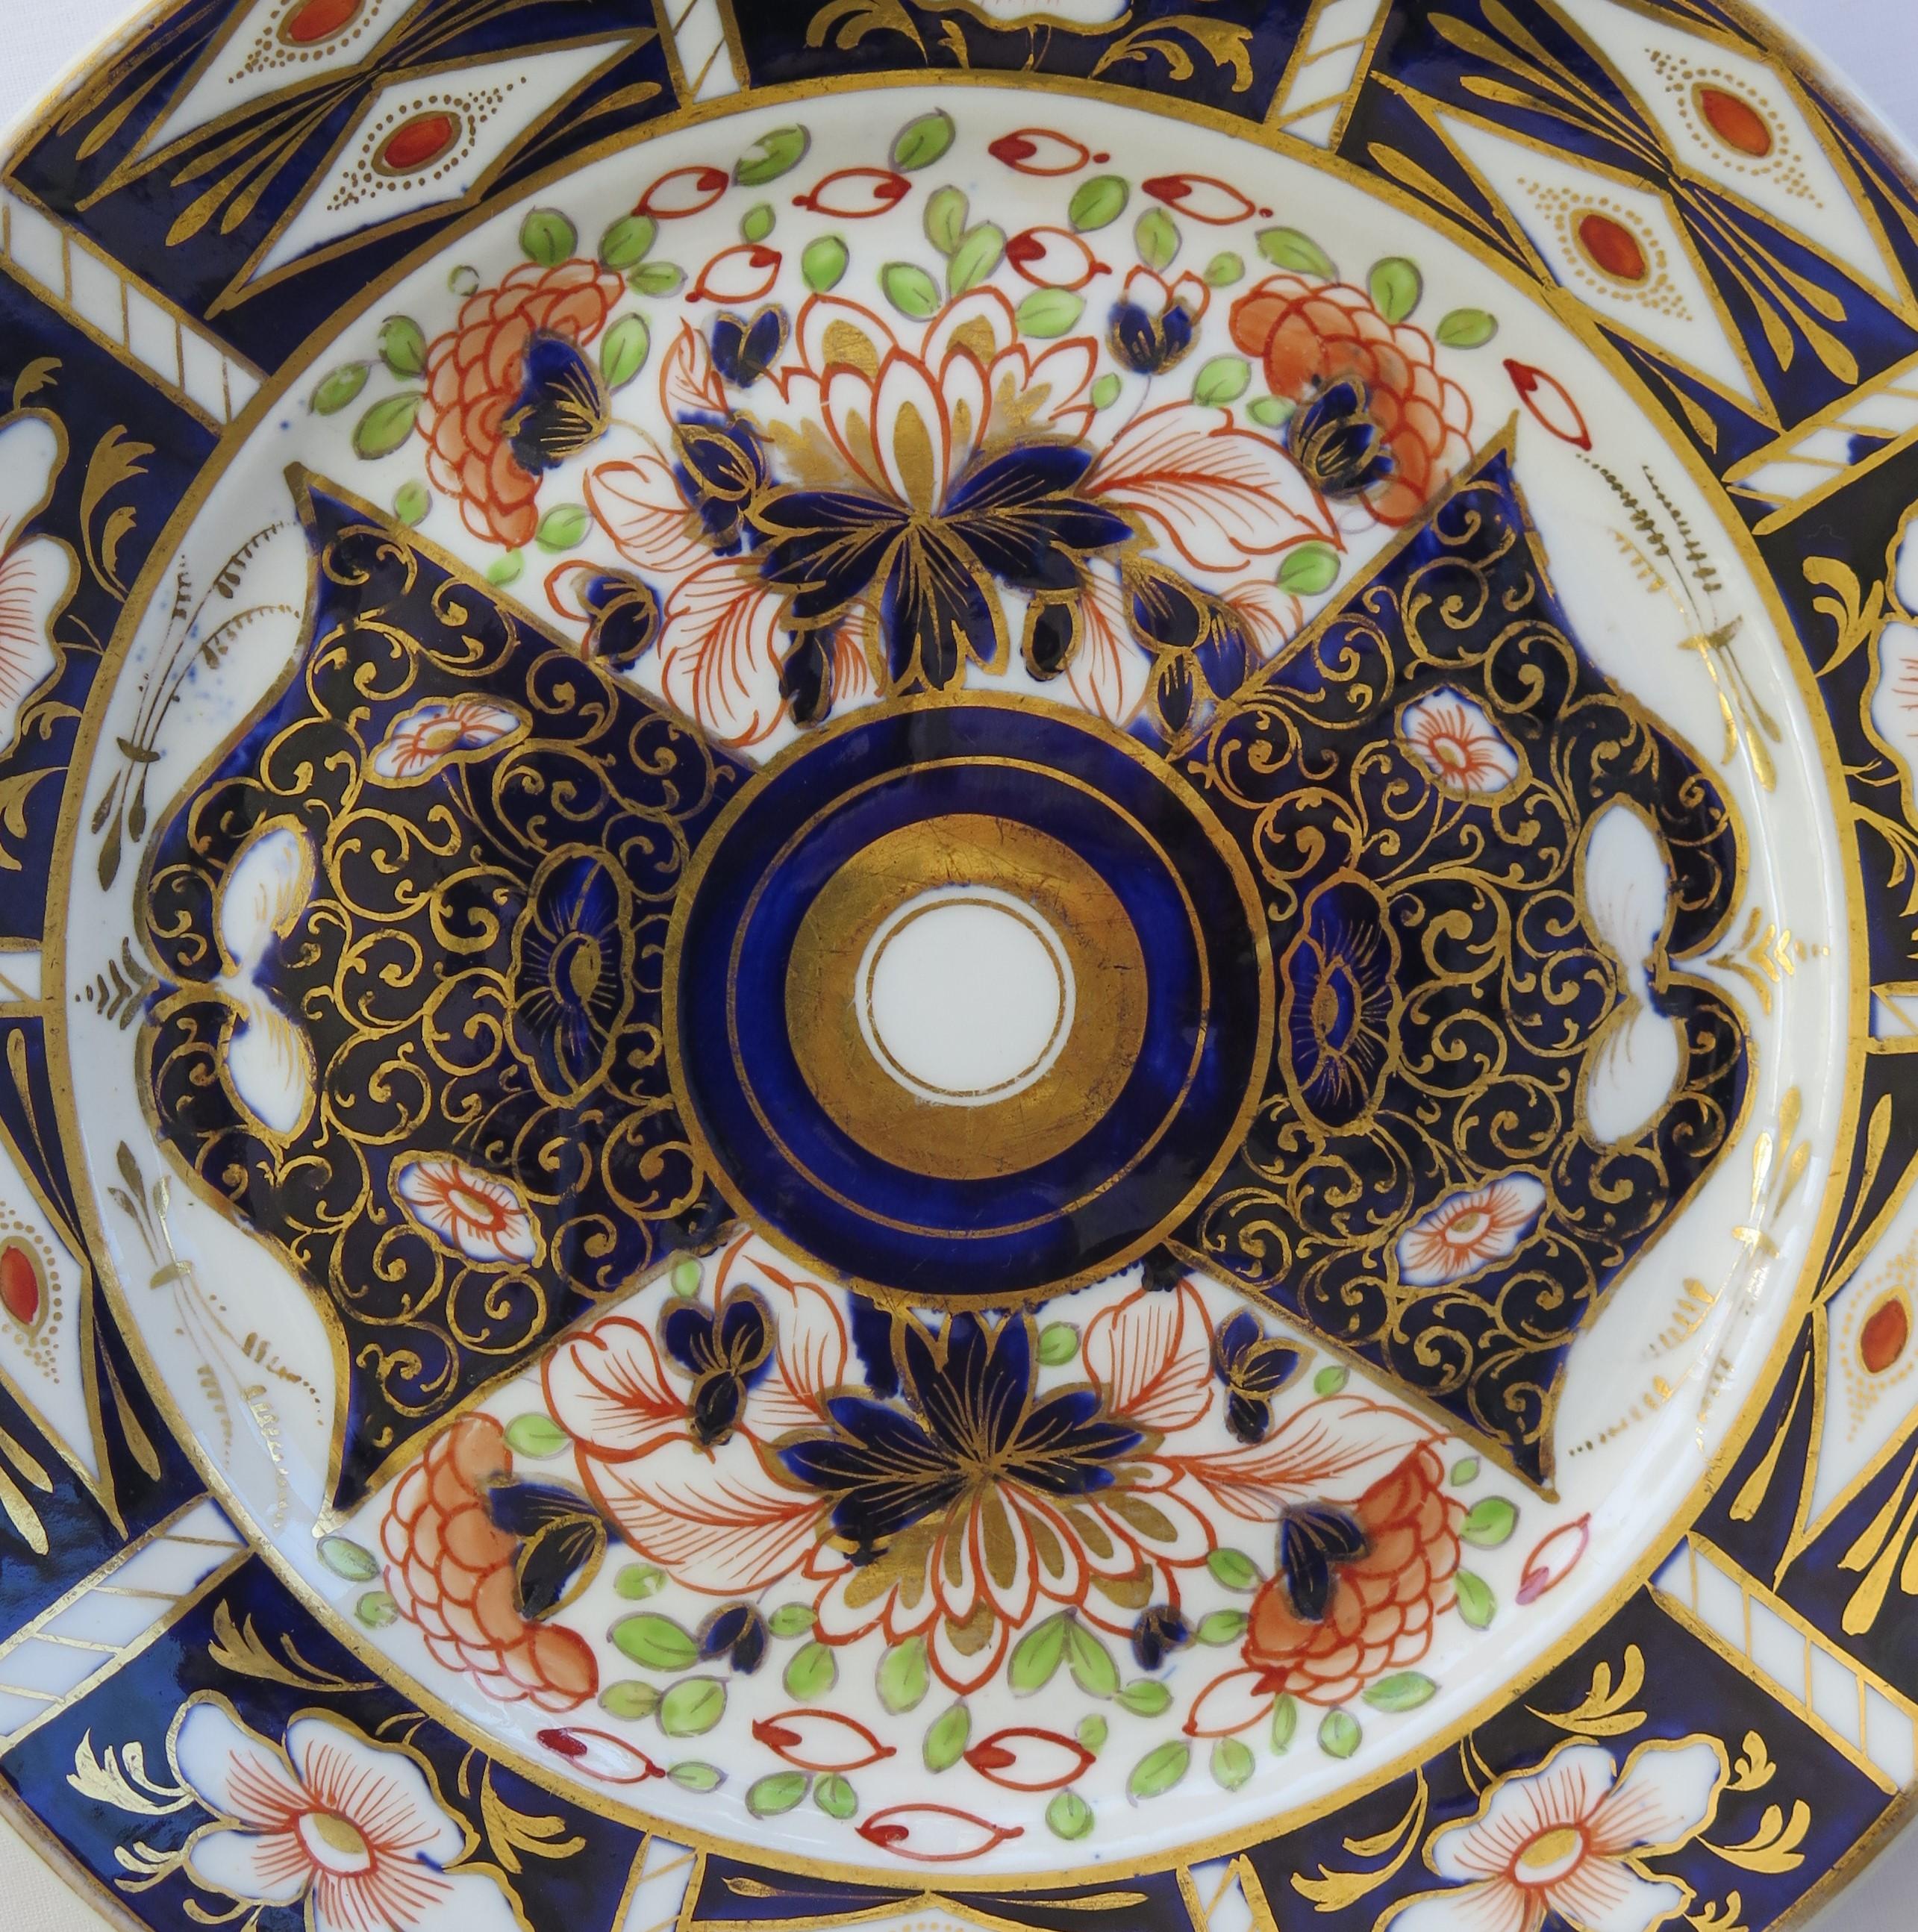 SIX Davenport Porcelain Plates Hand Painted and Gilded Pattern, Circa 1870 For Sale 5